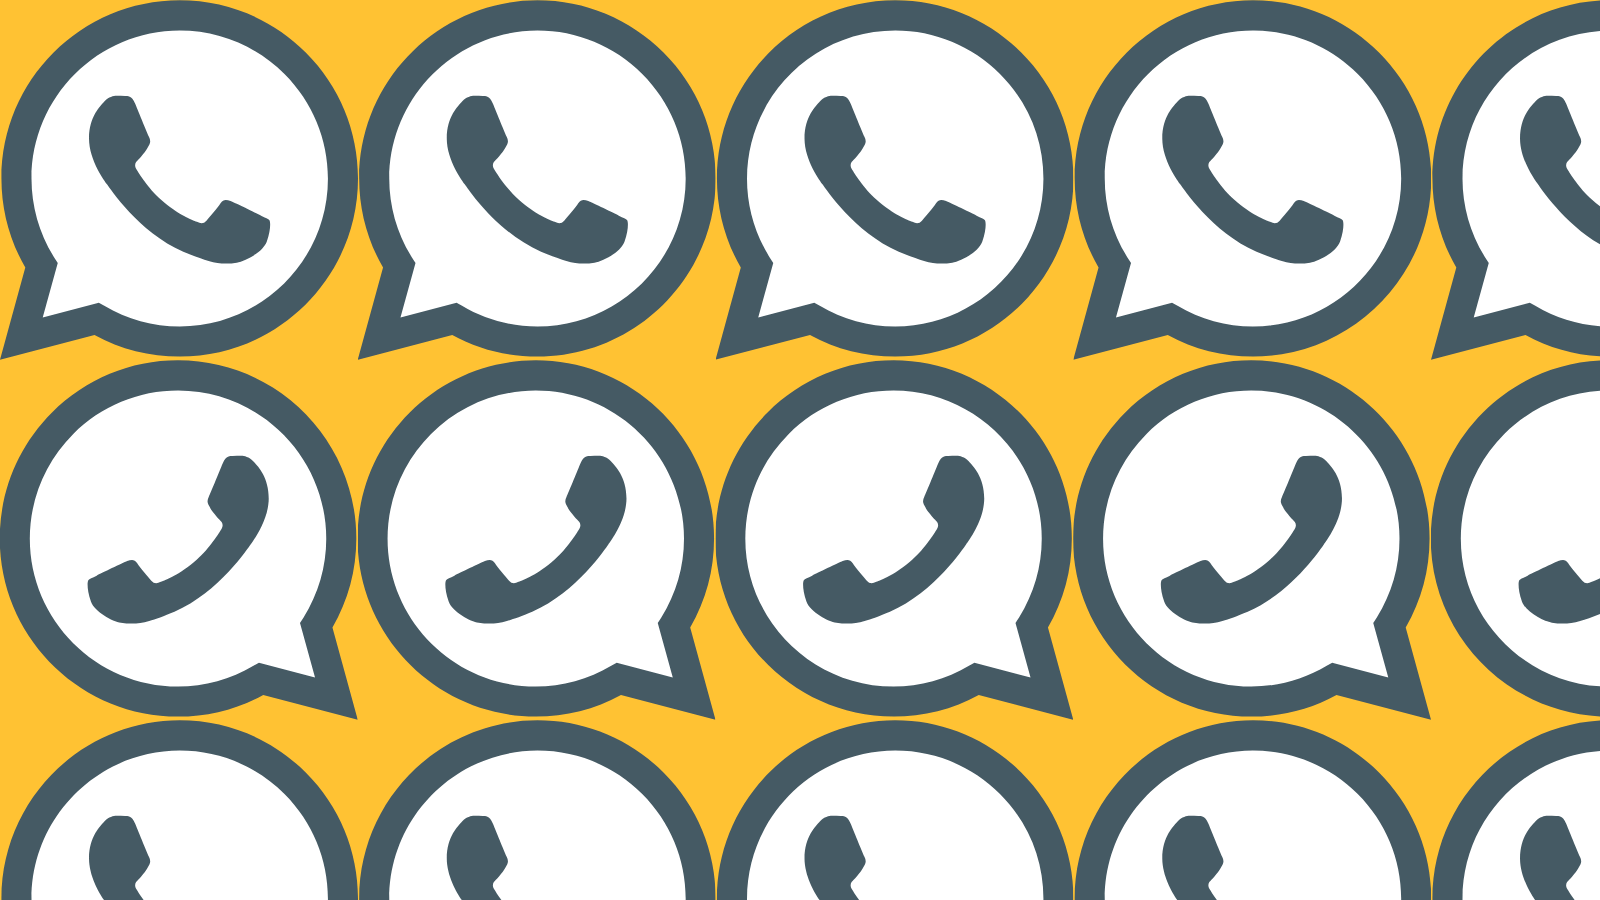 A repeating pattern of speech bubbles with a phone icon inside